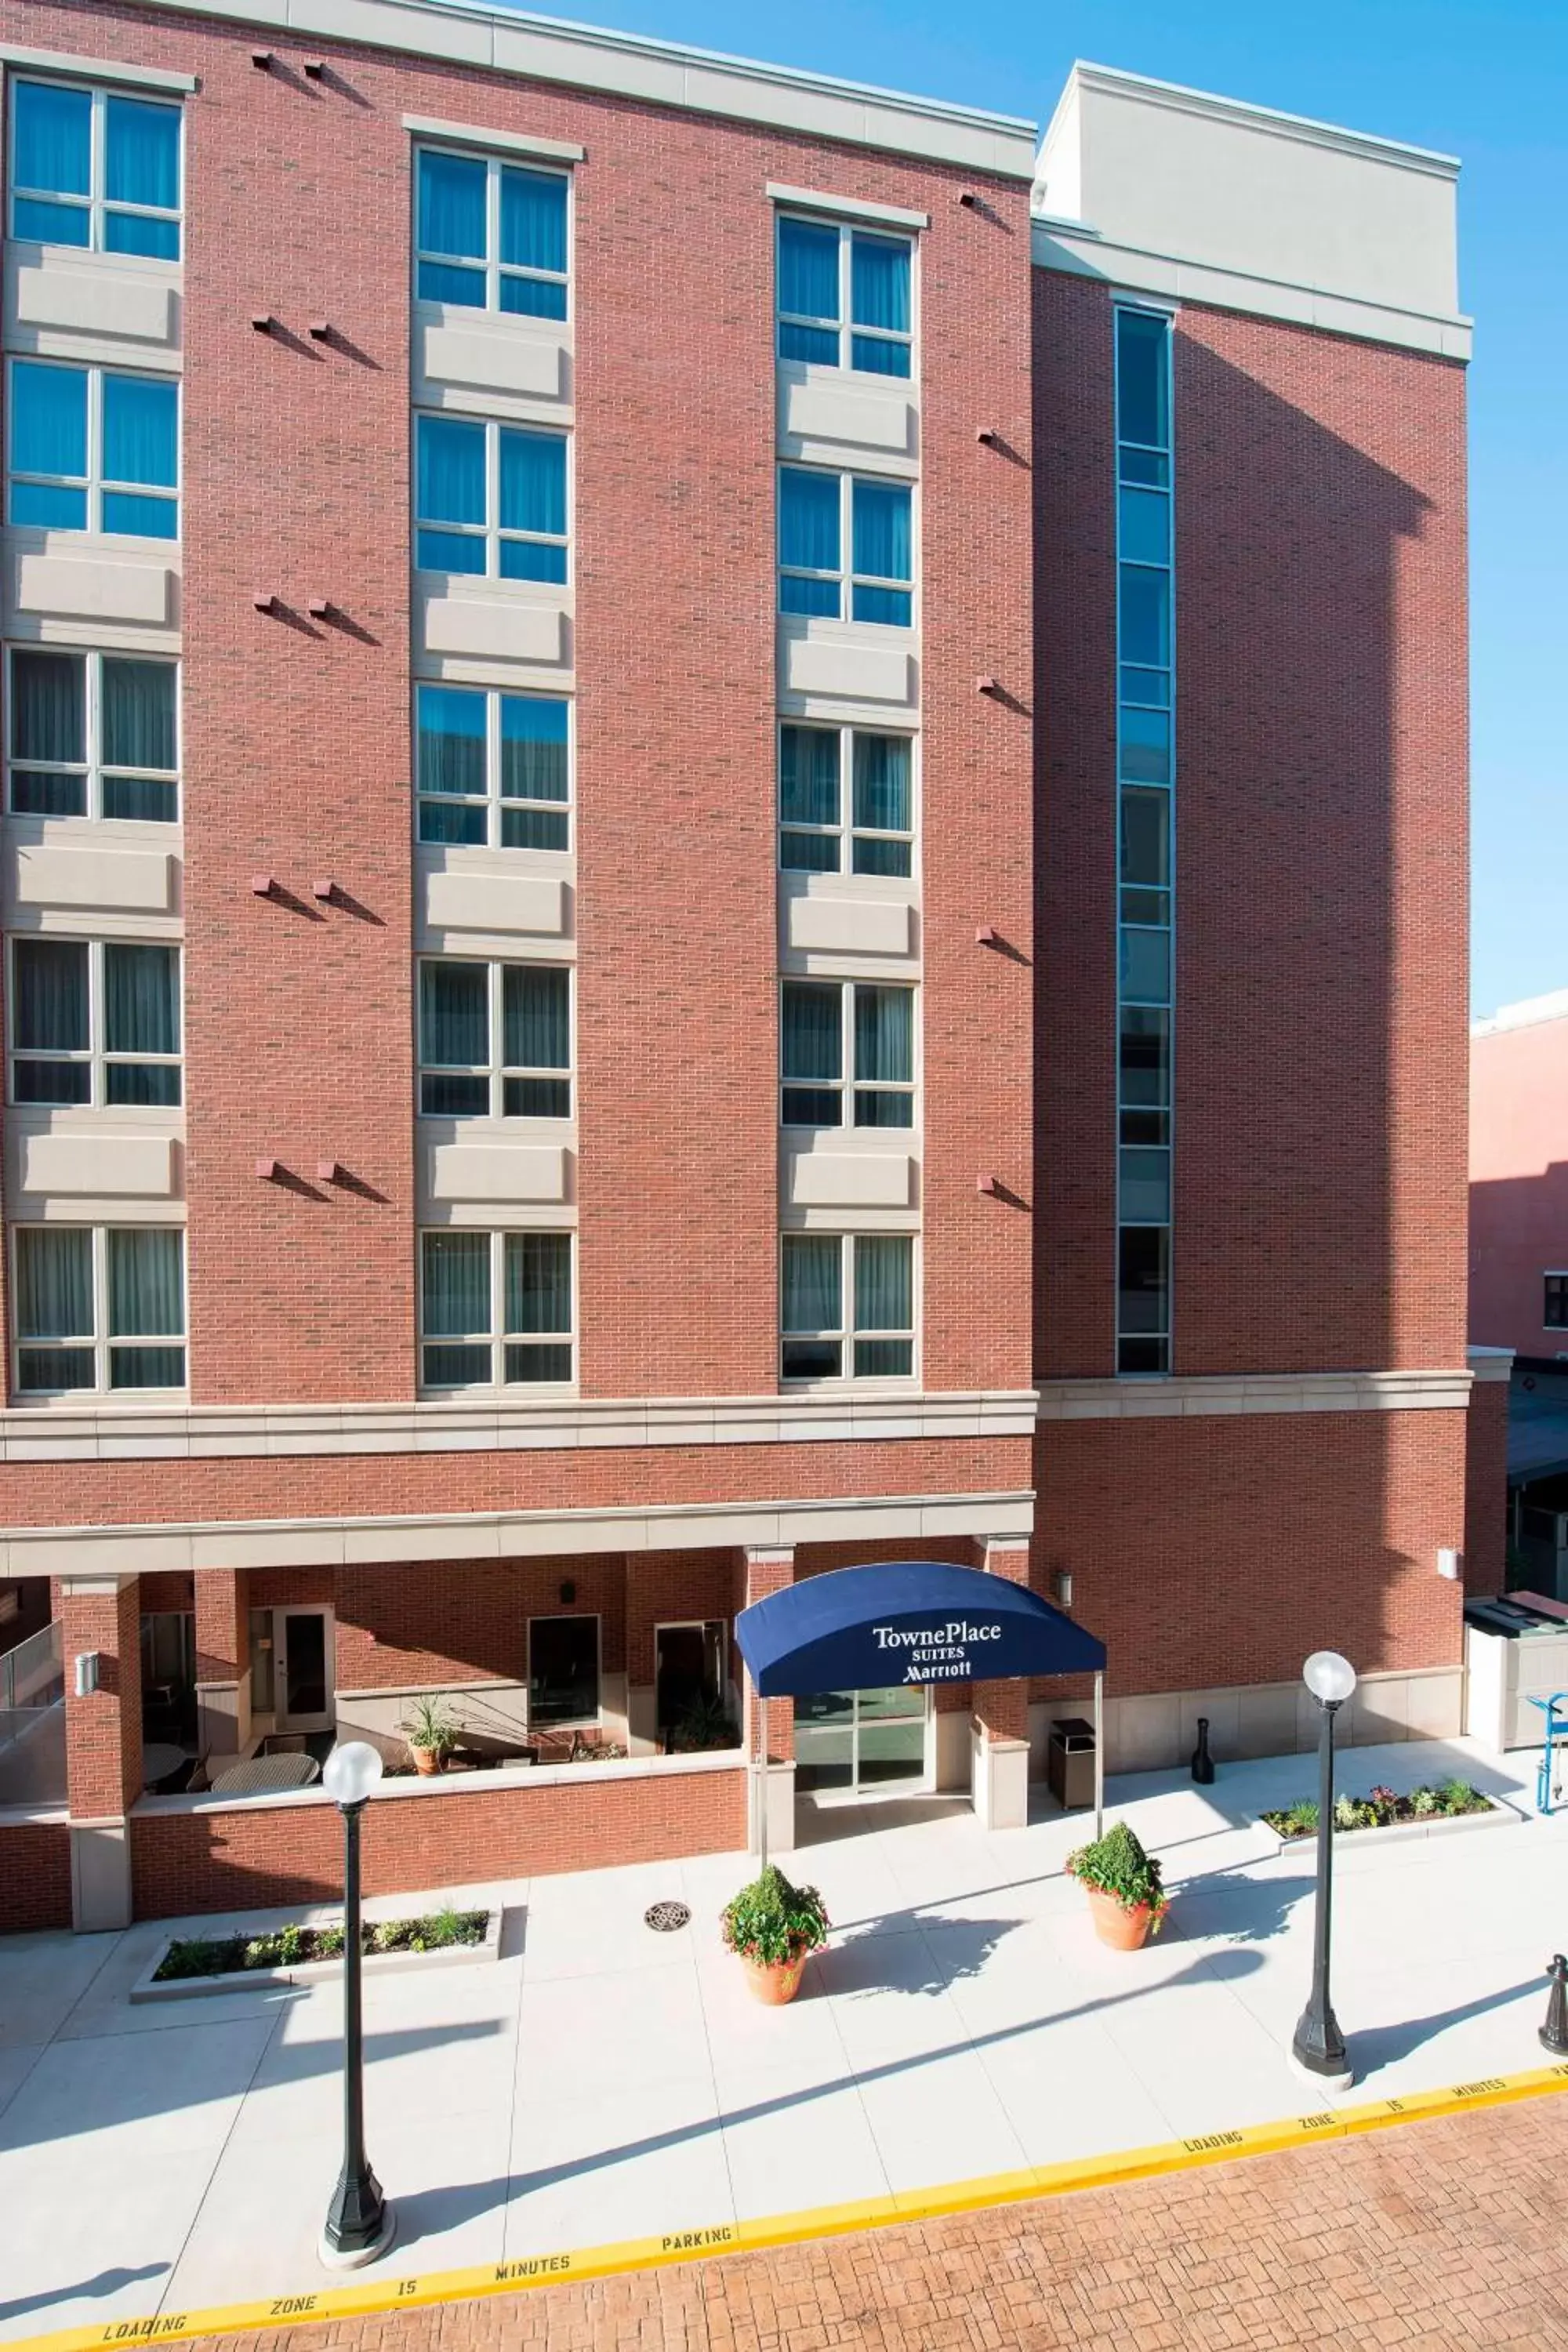 Property Building in TownePlace Suites by Marriott Champaign